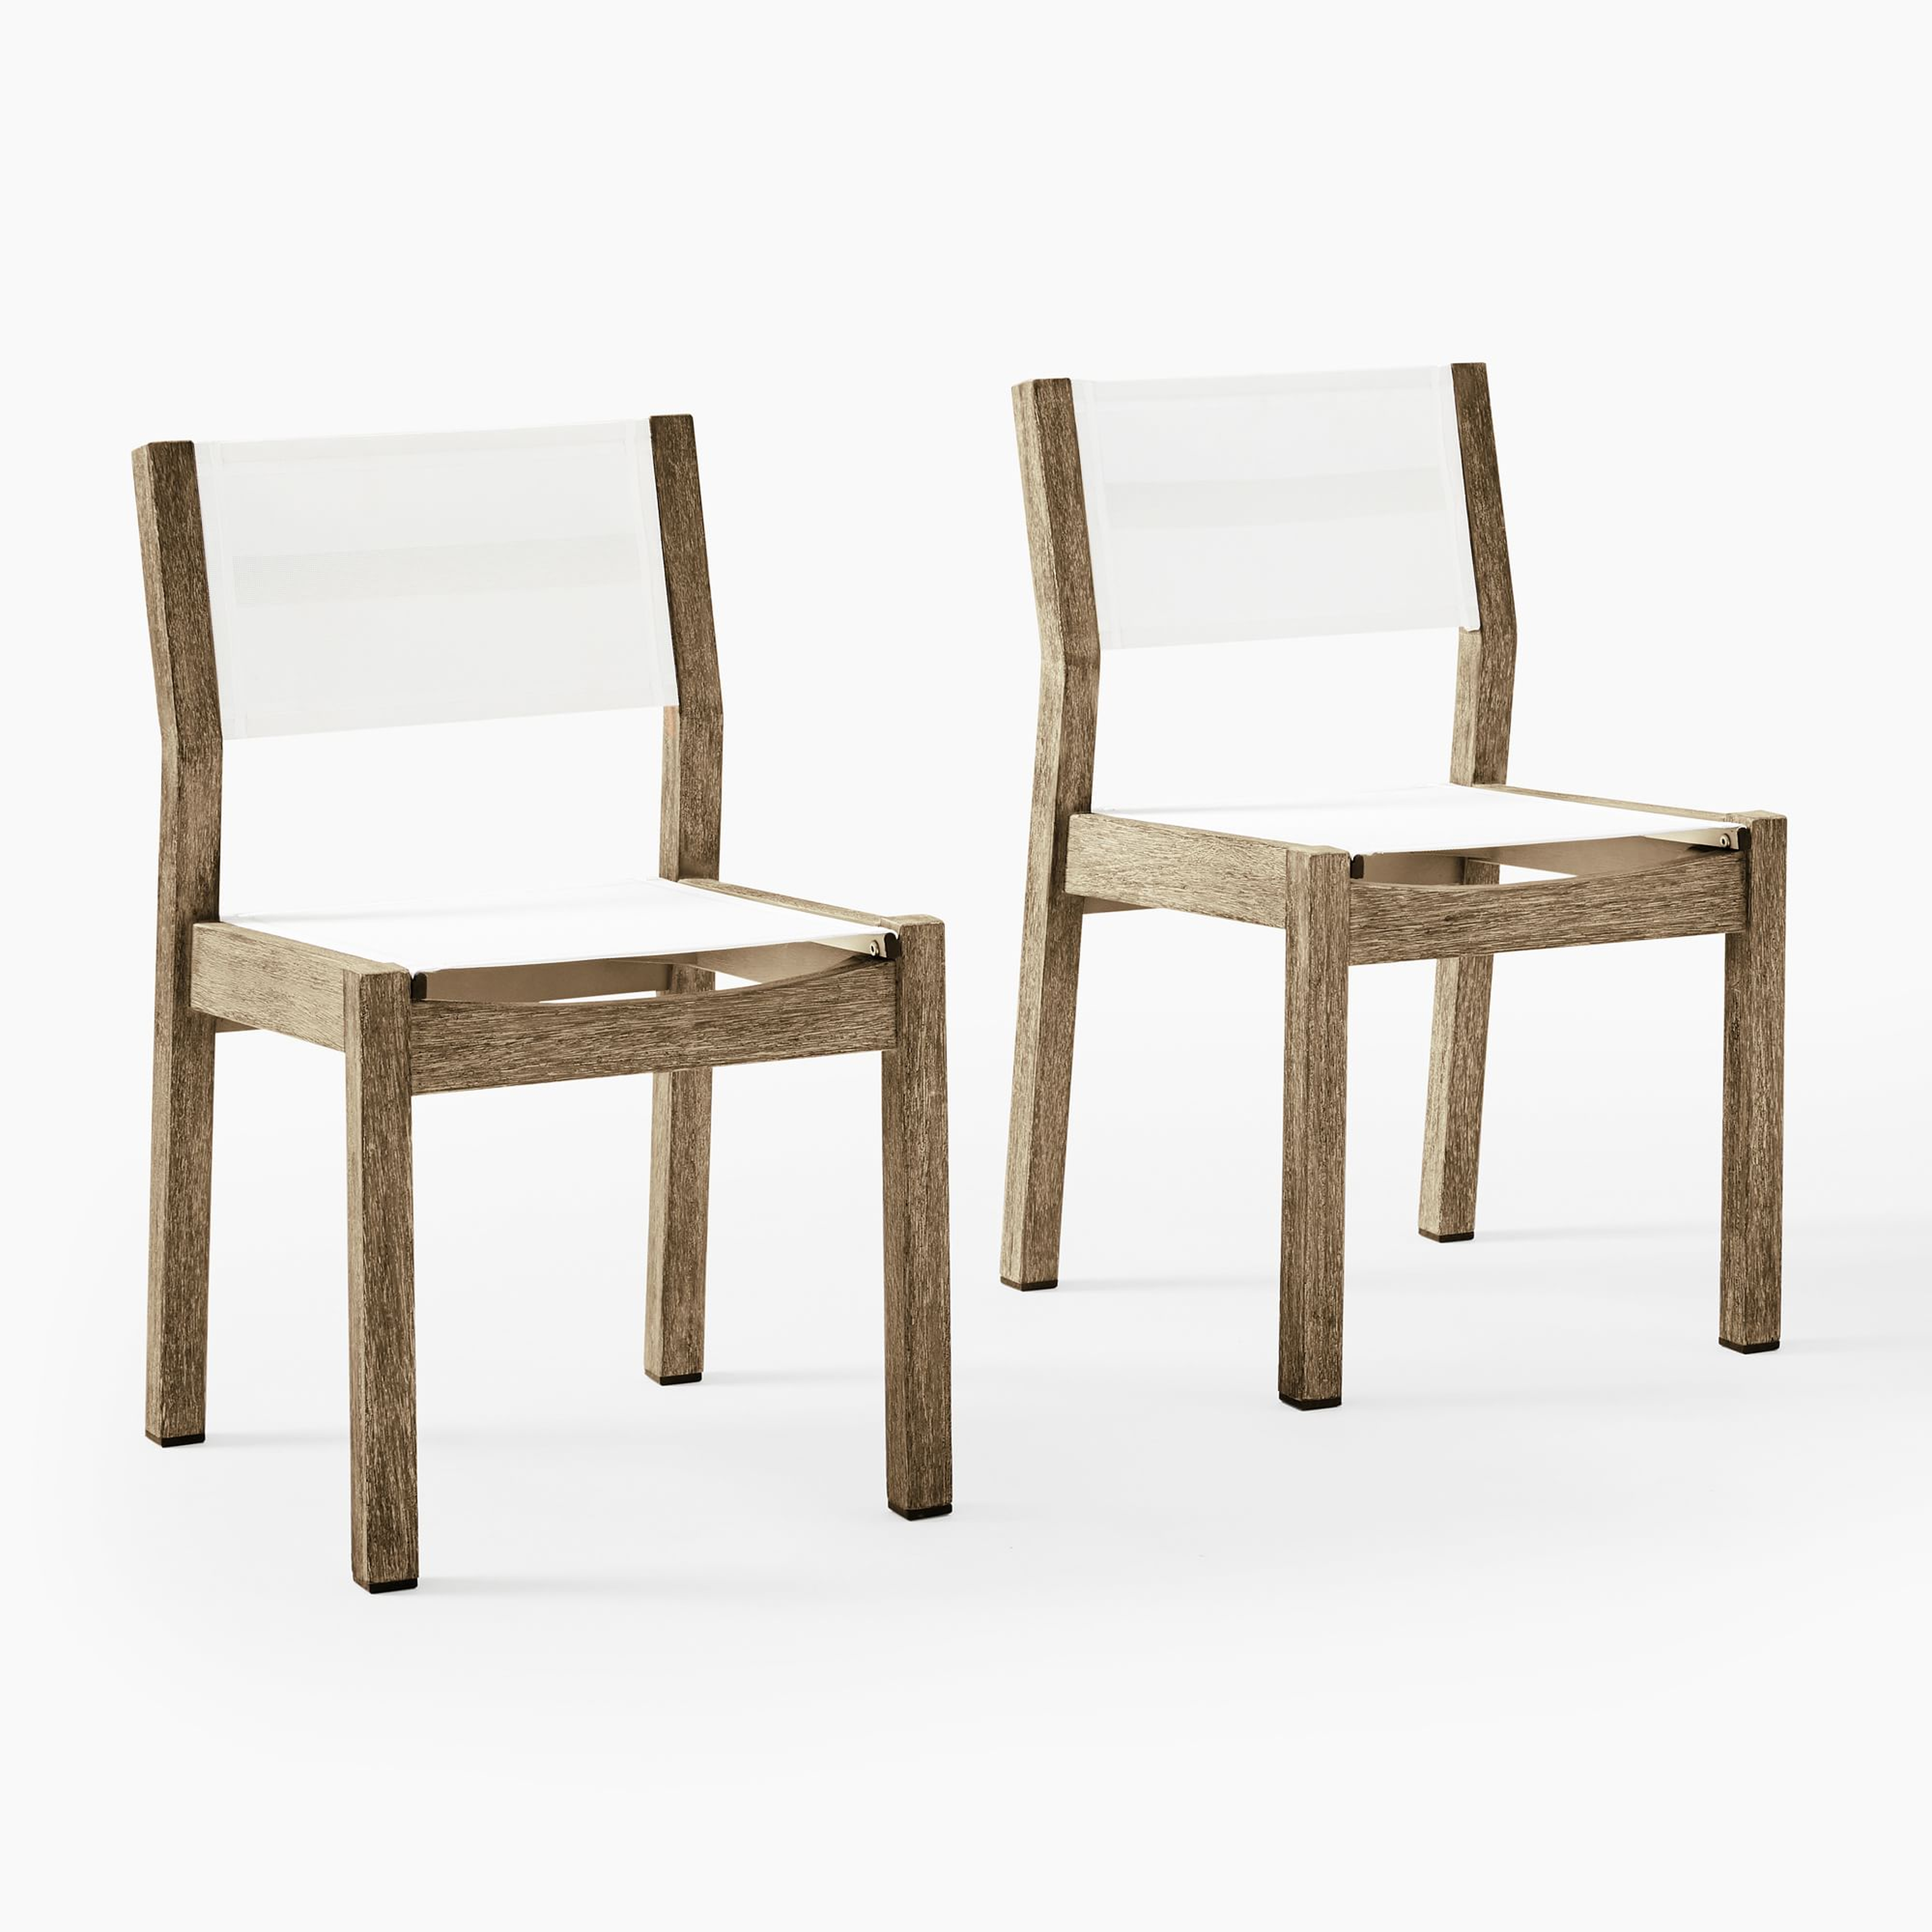 Portside Outdoor Textaline Dining Chairs, Driftwood, Set of 6 - West Elm